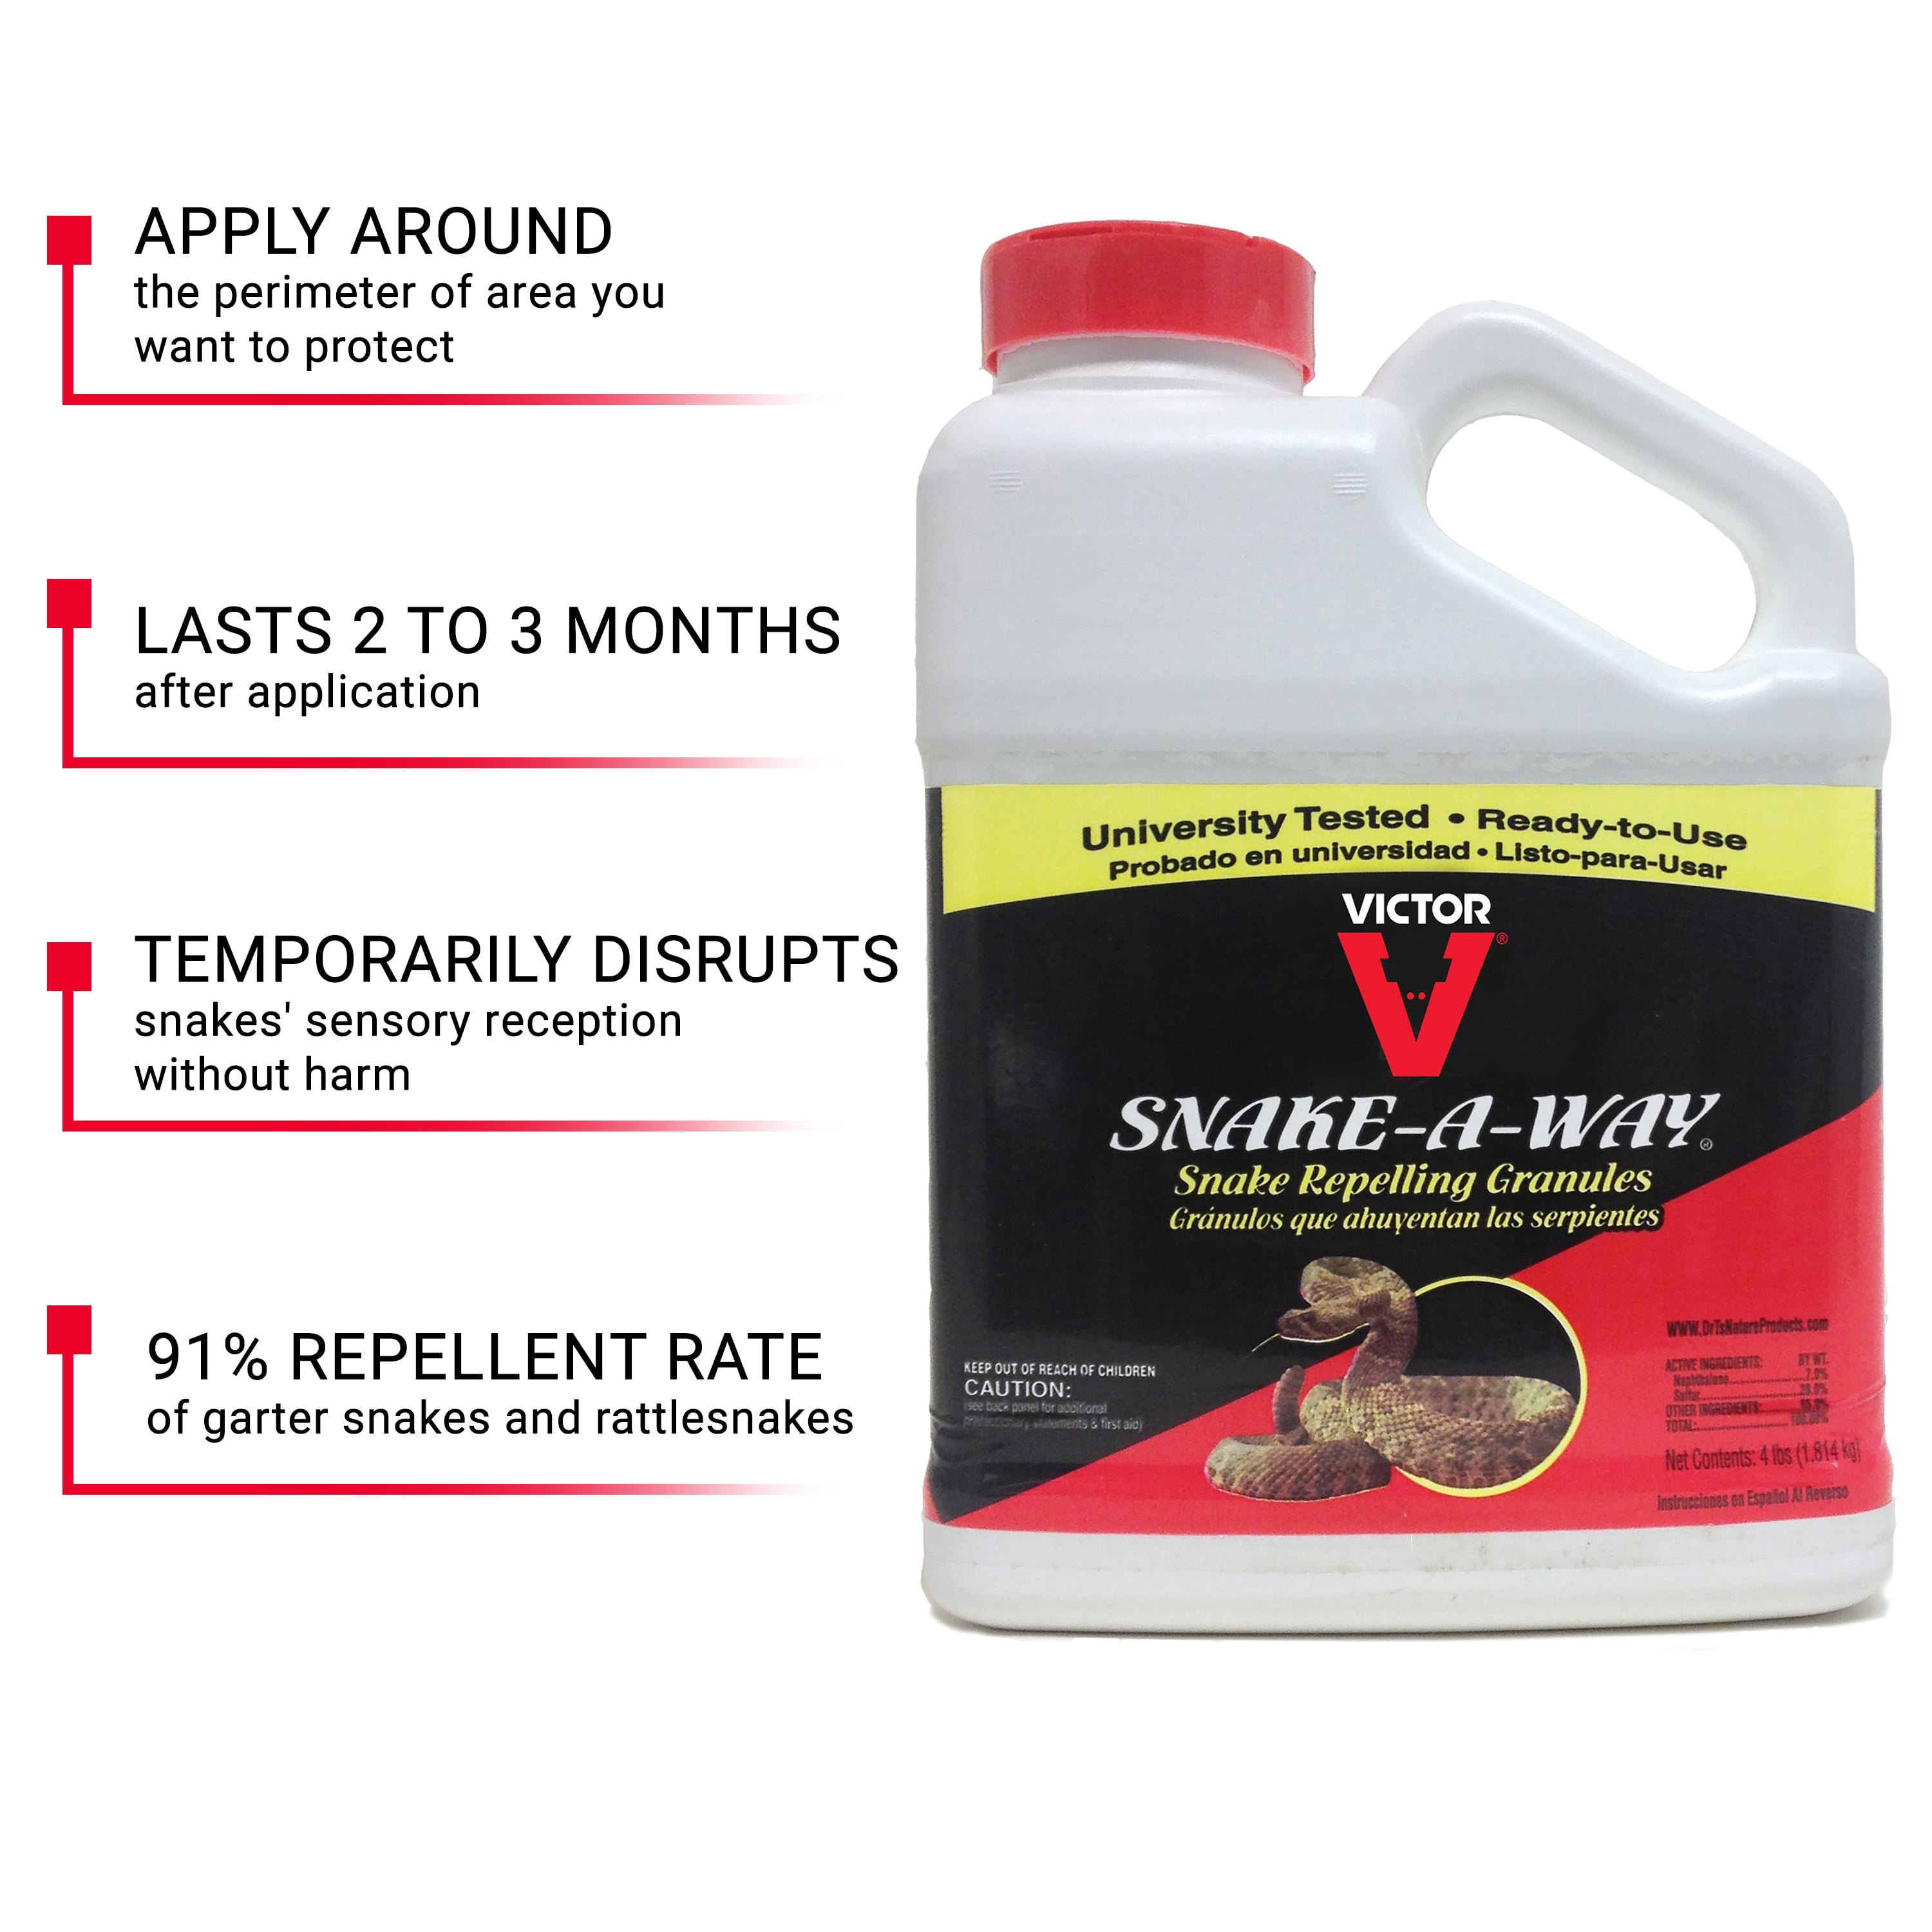 Victor  Snake-A-Way  Animal Repellent  Granules  For Snakes 1.75 lb. 